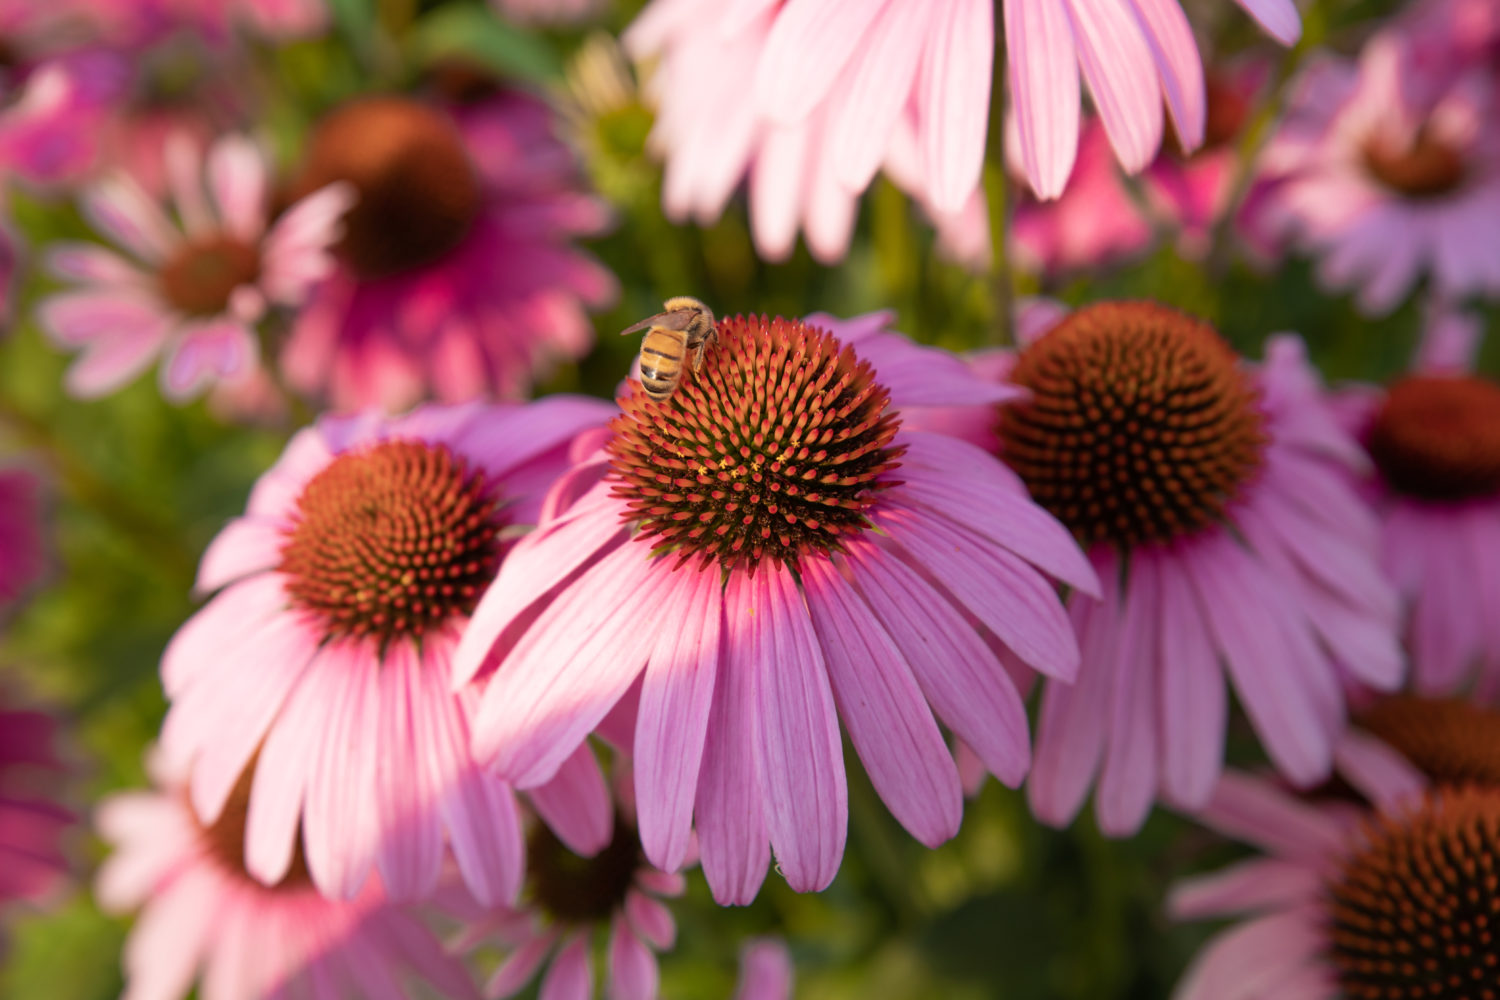 Echinacea and immunity support: Nutrilite has the research